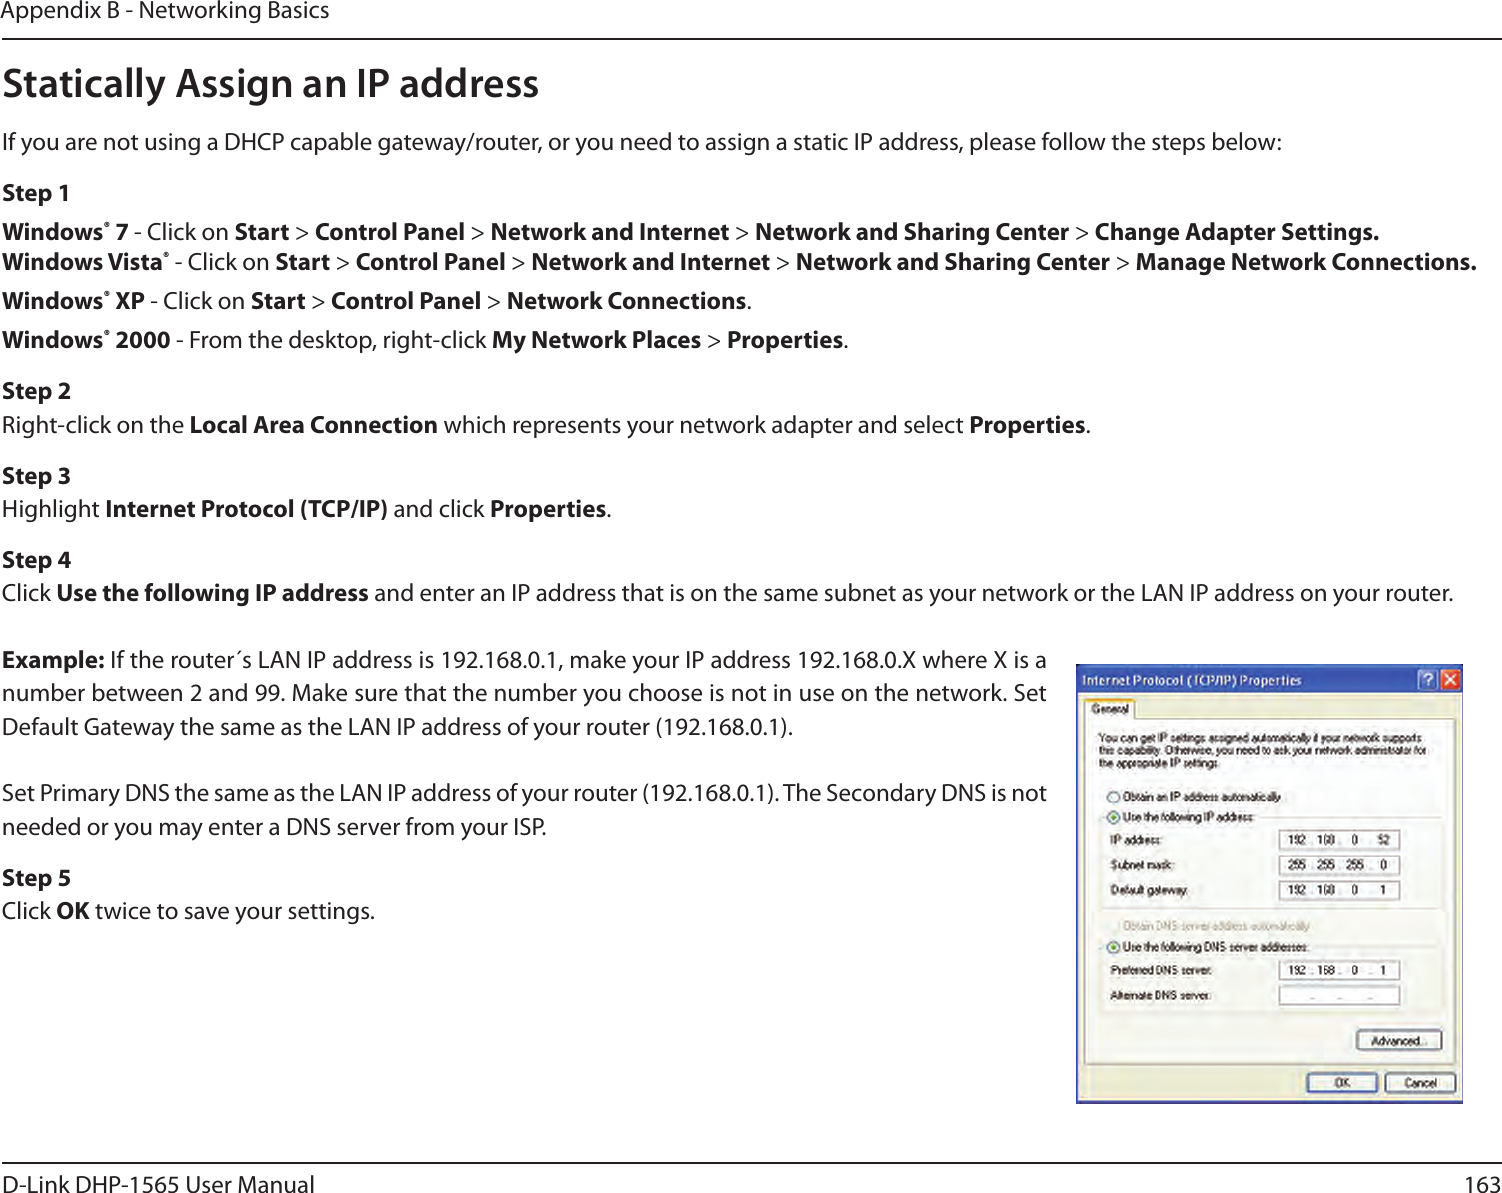 163D-Link DHP-1565 User ManualAppendix B - Networking BasicsStatically Assign an IP addressIf you are not using a DHCP capable gateway/router, or you need to assign a static IP address, please follow the steps below:Step 1Windows® 7 - Click on Start &gt; Control Panel &gt; Network and Internet &gt; Network and Sharing Center &gt; Change Adapter Settings. Windows Vista® - Click on Start &gt; Control Panel &gt; Network and Internet &gt; Network and Sharing Center &gt; Manage Network Connections.Windows® XP - Click on Start &gt; Control Panel &gt; Network Connections.Windows® 2000 - From the desktop, right-click My Network Places &gt; Properties.Step 2Right-click on the Local Area Connection which represents your network adapter and select Properties.Step 3Highlight Internet Protocol (TCP/IP) and click Properties.Step 4Click Use the following IP address and enter an IP address that is on the same subnet as your network or the LAN IP address on your router.Example: If the router´s LAN IP address is 192.168.0.1, make your IP address 192.168.0.X where X is a number between 2 and 99. Make sure that the number you choose is not in use on the network. Set Default Gateway the same as the LAN IP address of your router (192.168.0.1). Set Primary DNS the same as the LAN IP address of your router (192.168.0.1). The Secondary DNS is not needed or you may enter a DNS server from your ISP.Step 5Click OK twice to save your settings.